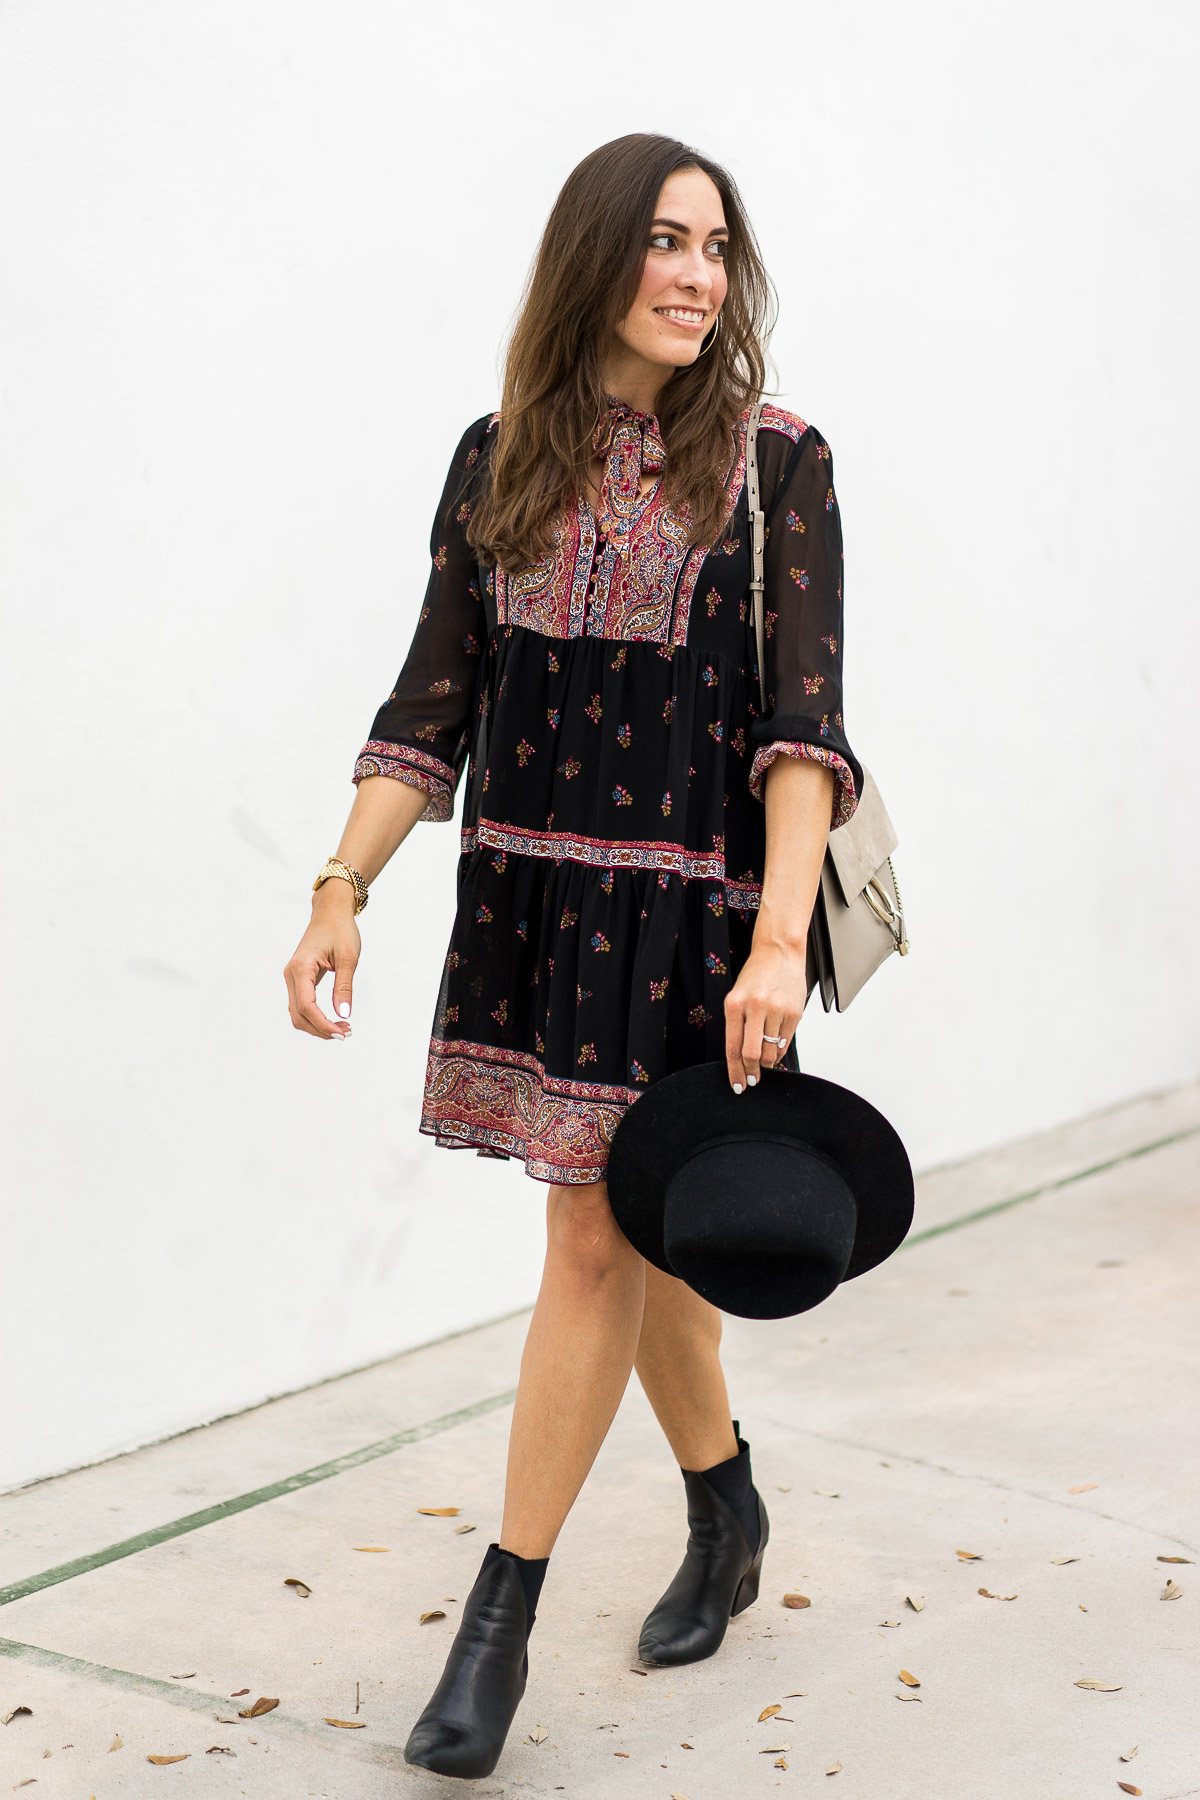 Amanda from A Glam Lifestyle wears easy boho dress the Joie Alpina dress with black fedora and her Chloe Faye bag